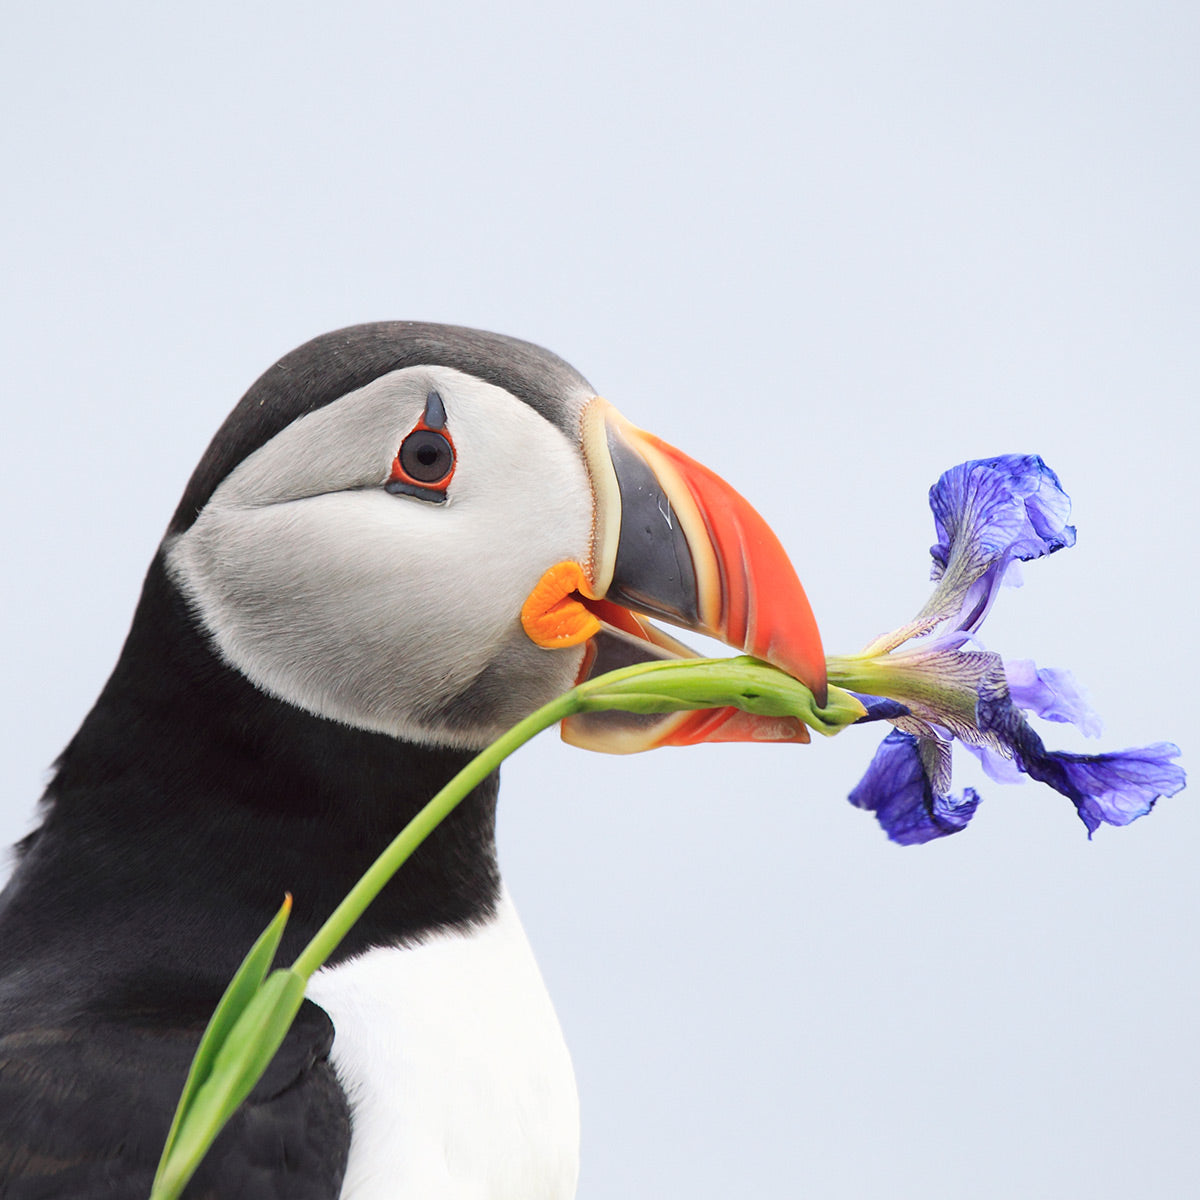 A close up photo of an Atlantic puffin holding a blue flower in its beak